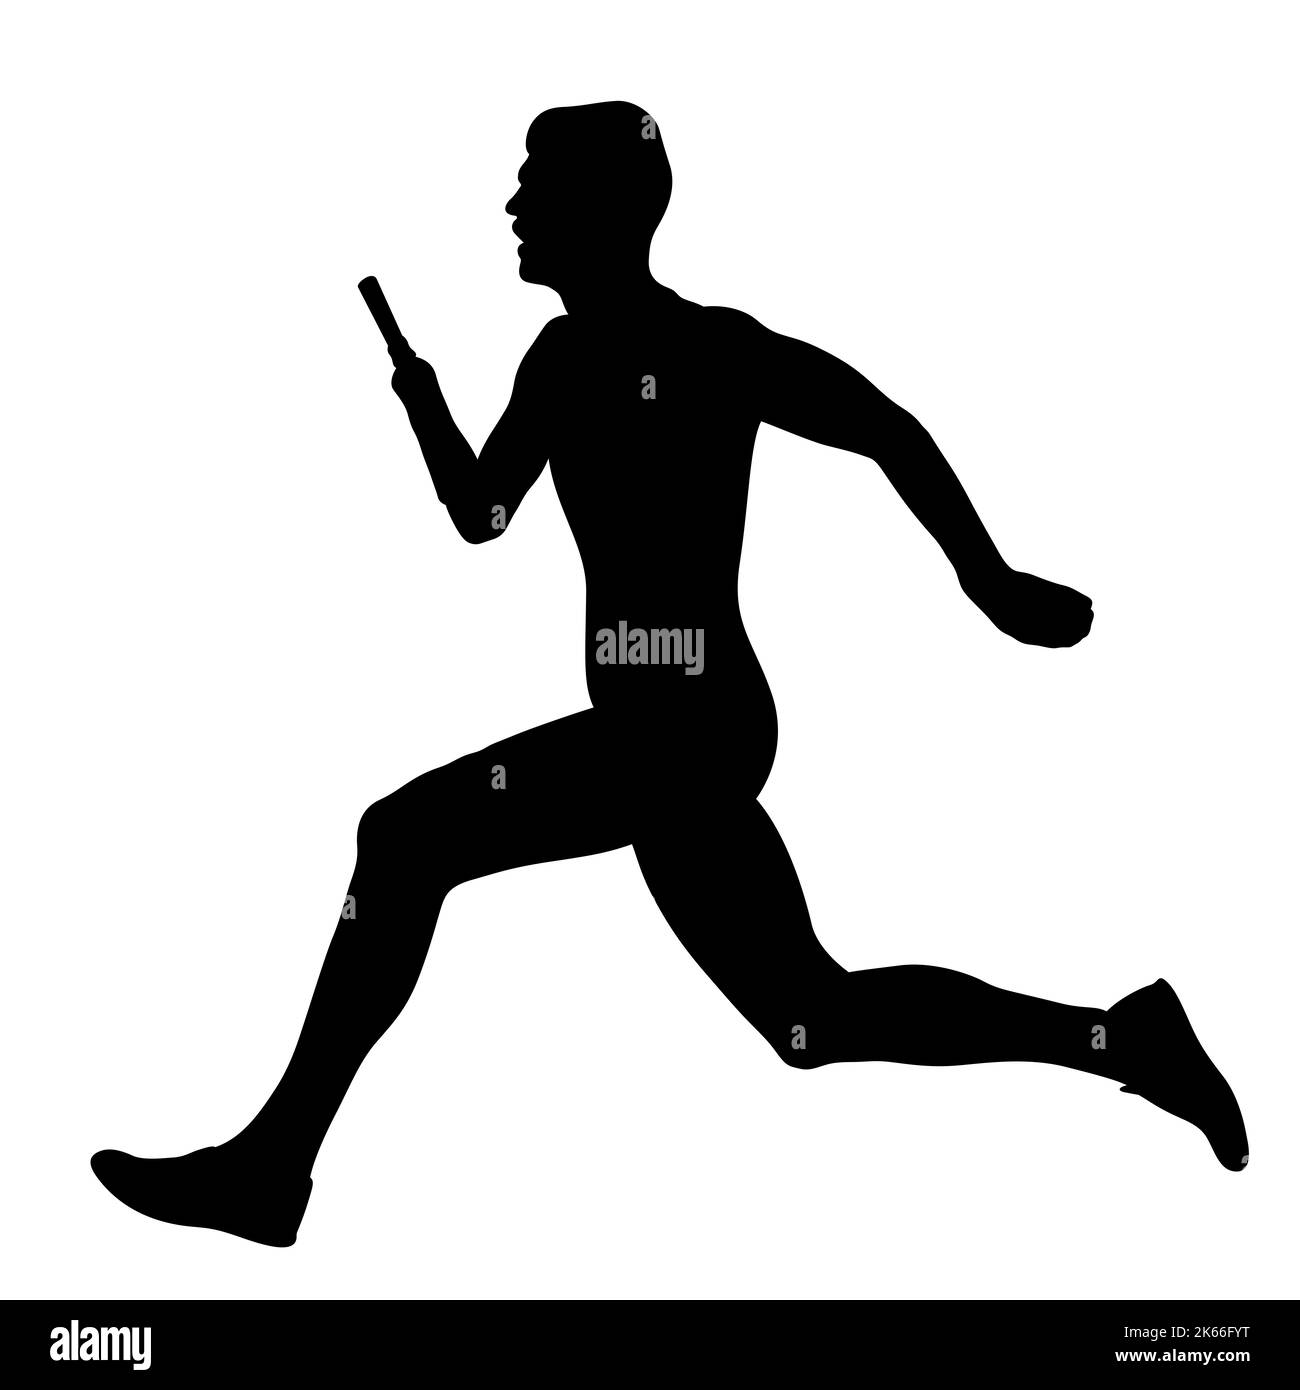 disabled athlete without hand running black silhouette Stock Photo